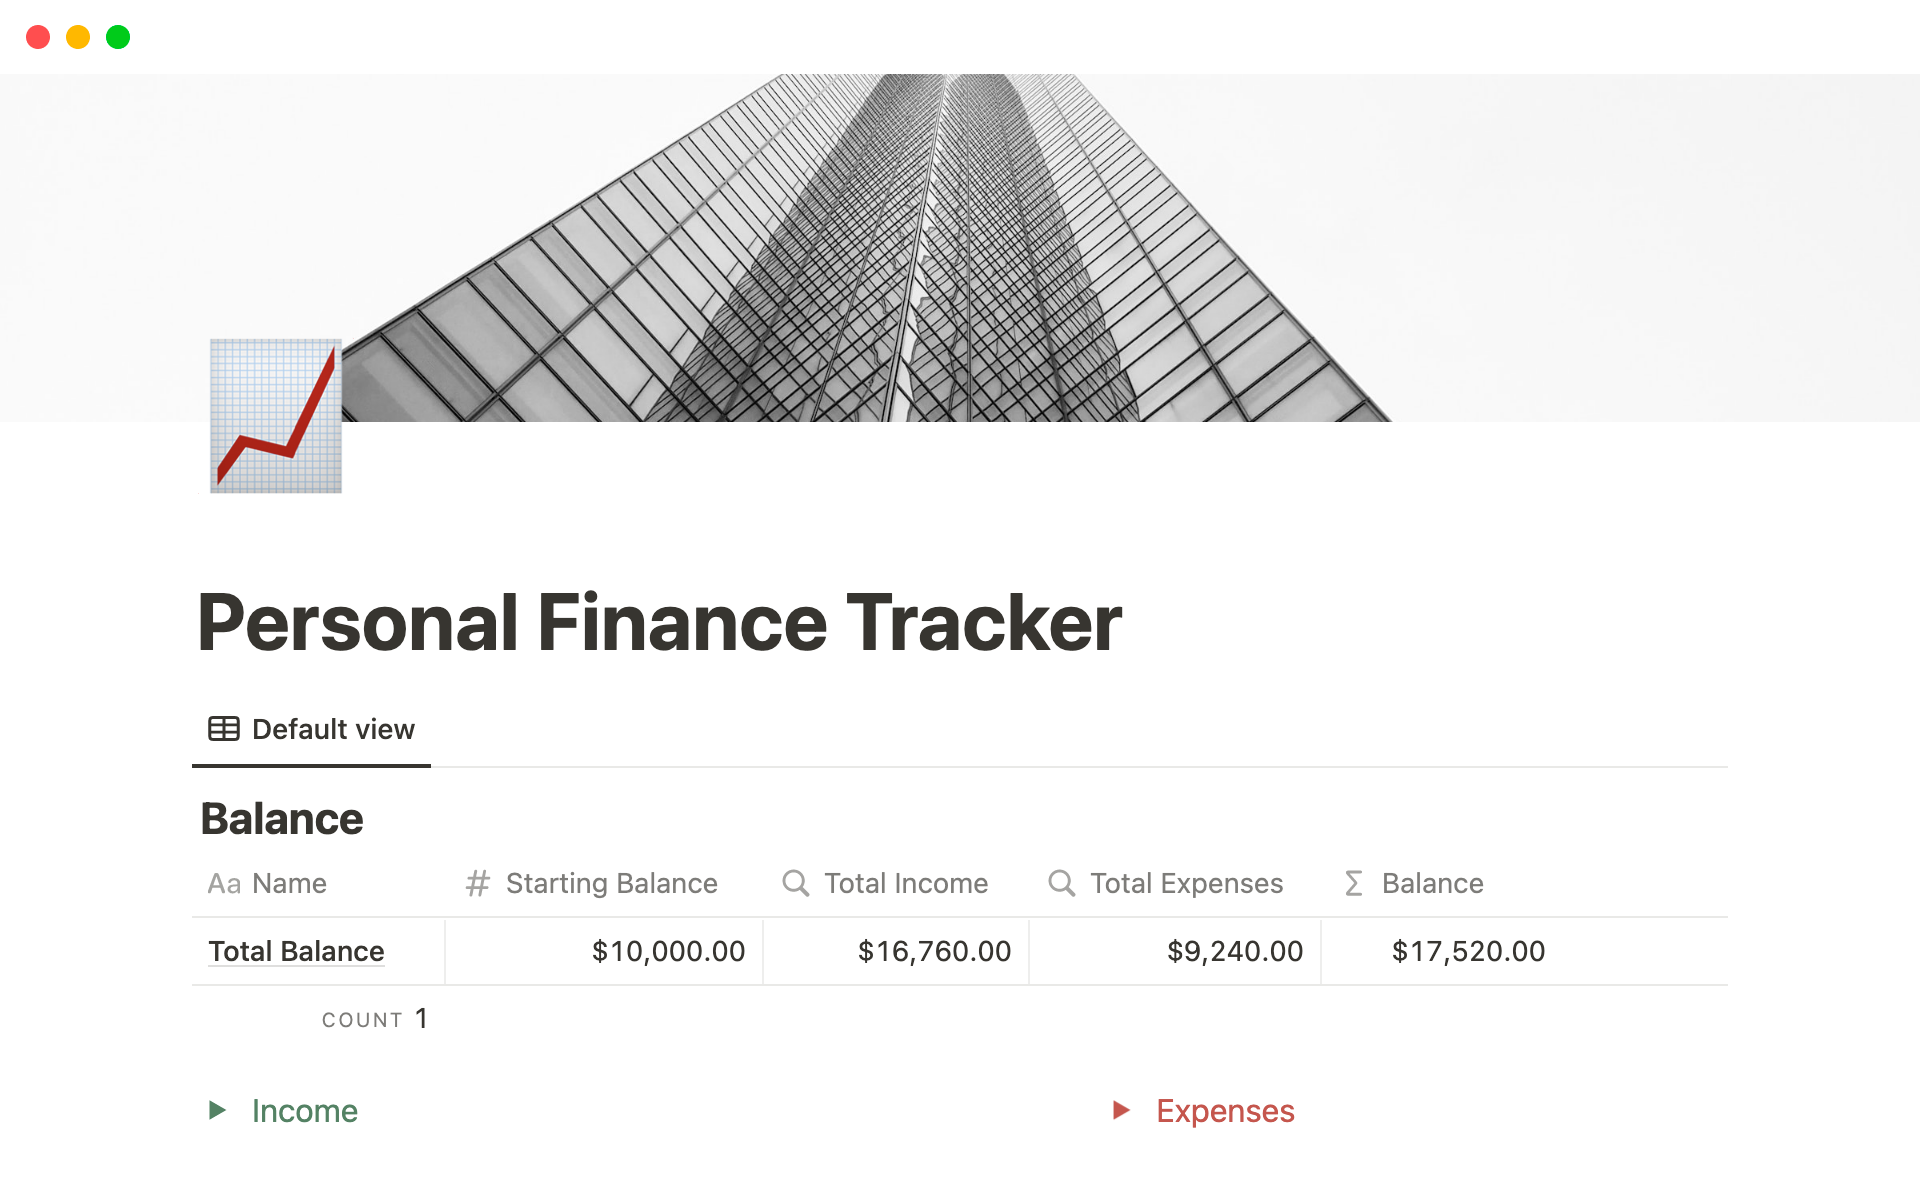 Helps you track your finances